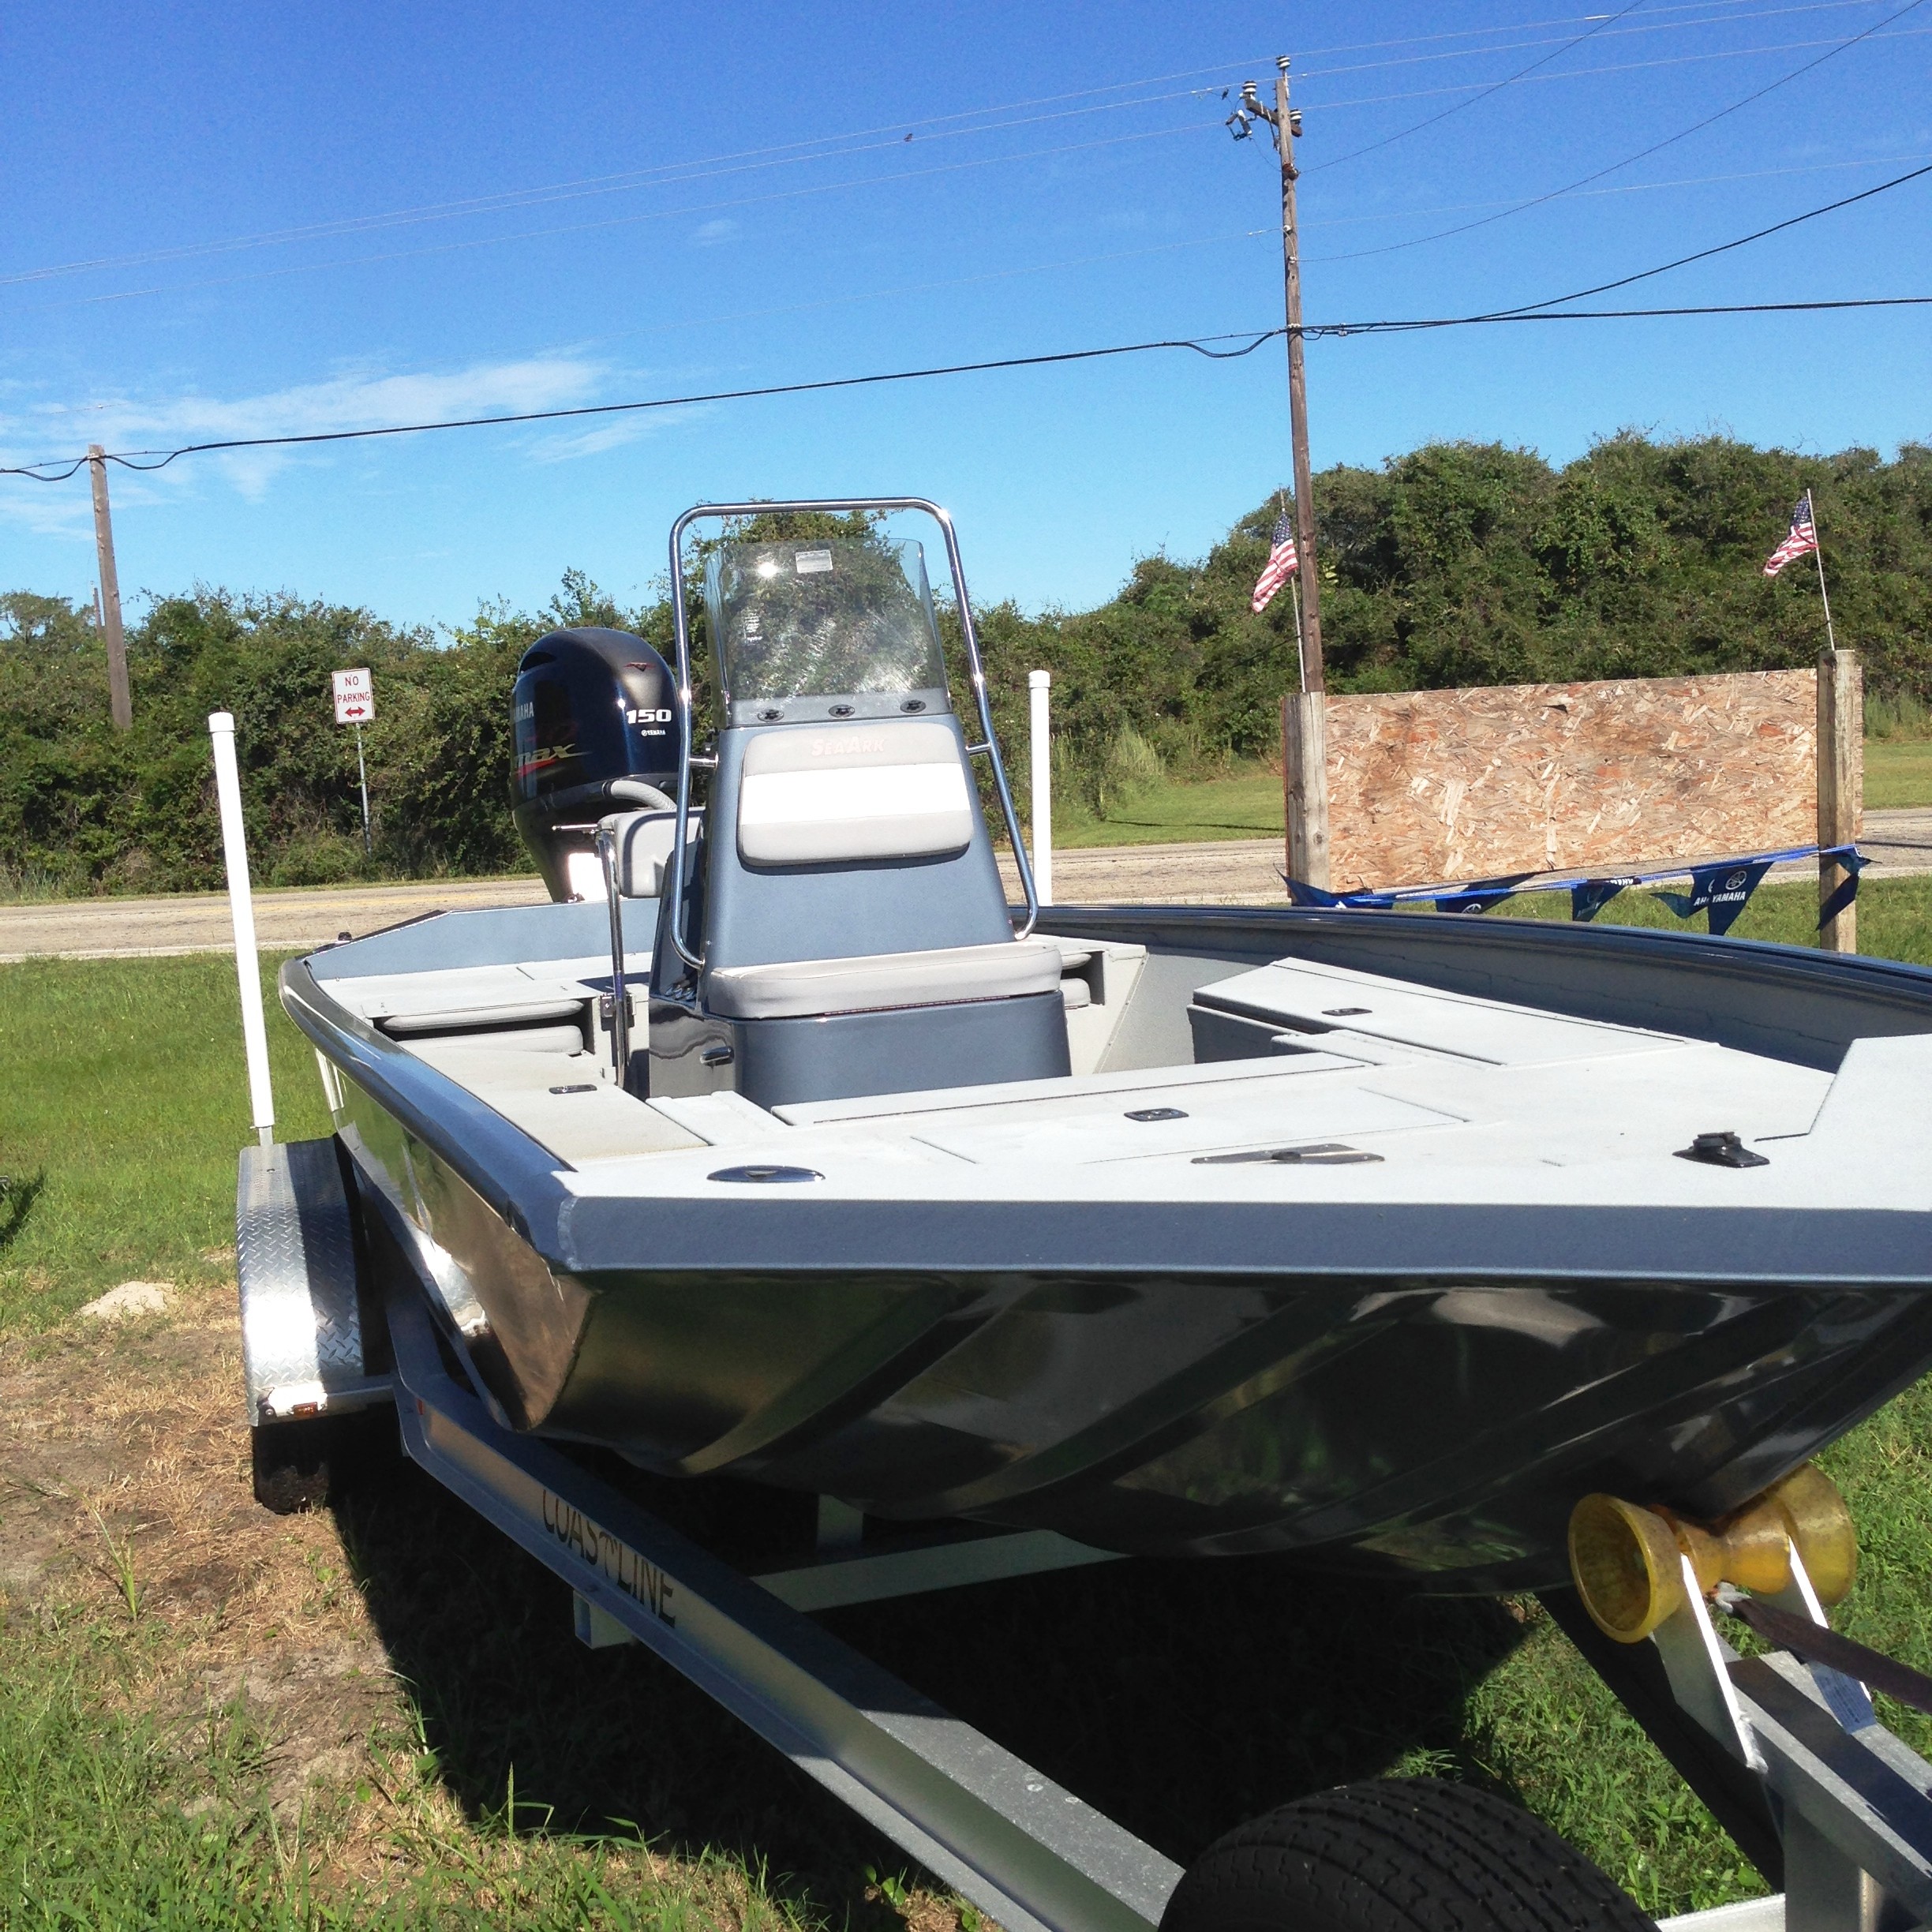 Sea Ark 22 72 Bay Extreme In Steele Blue With Yamaha VF150 Coastline Tandem Trailer and mounted Spare 125 Ga Welded Aluminum hull with 3 16 Keel